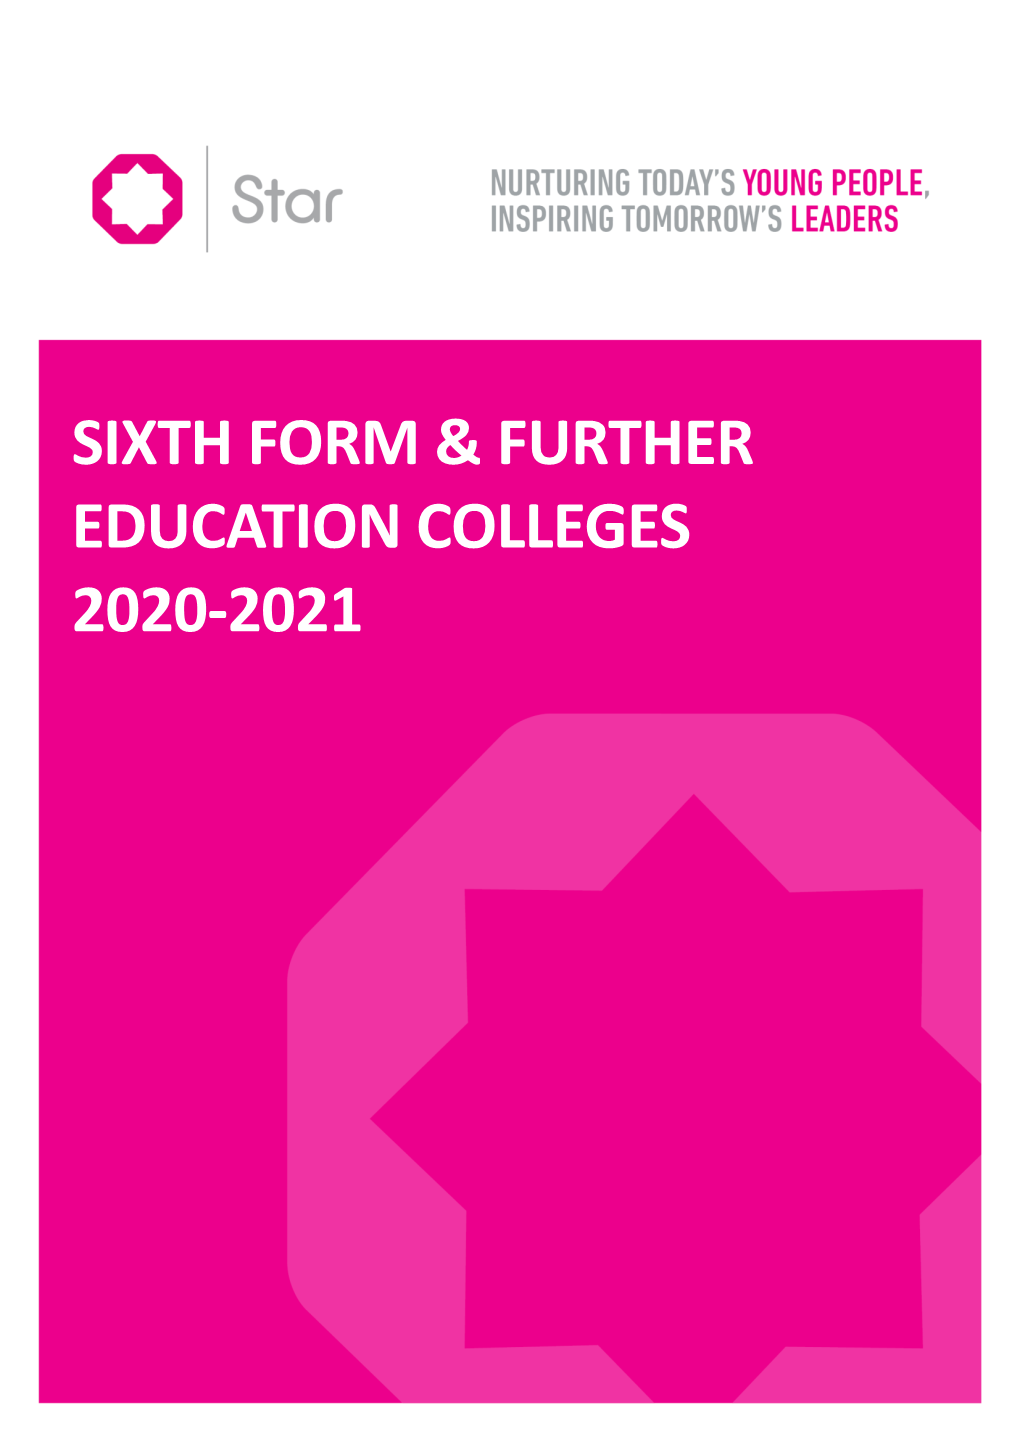 Sixth Form & Further Education Colleges 2020-2021